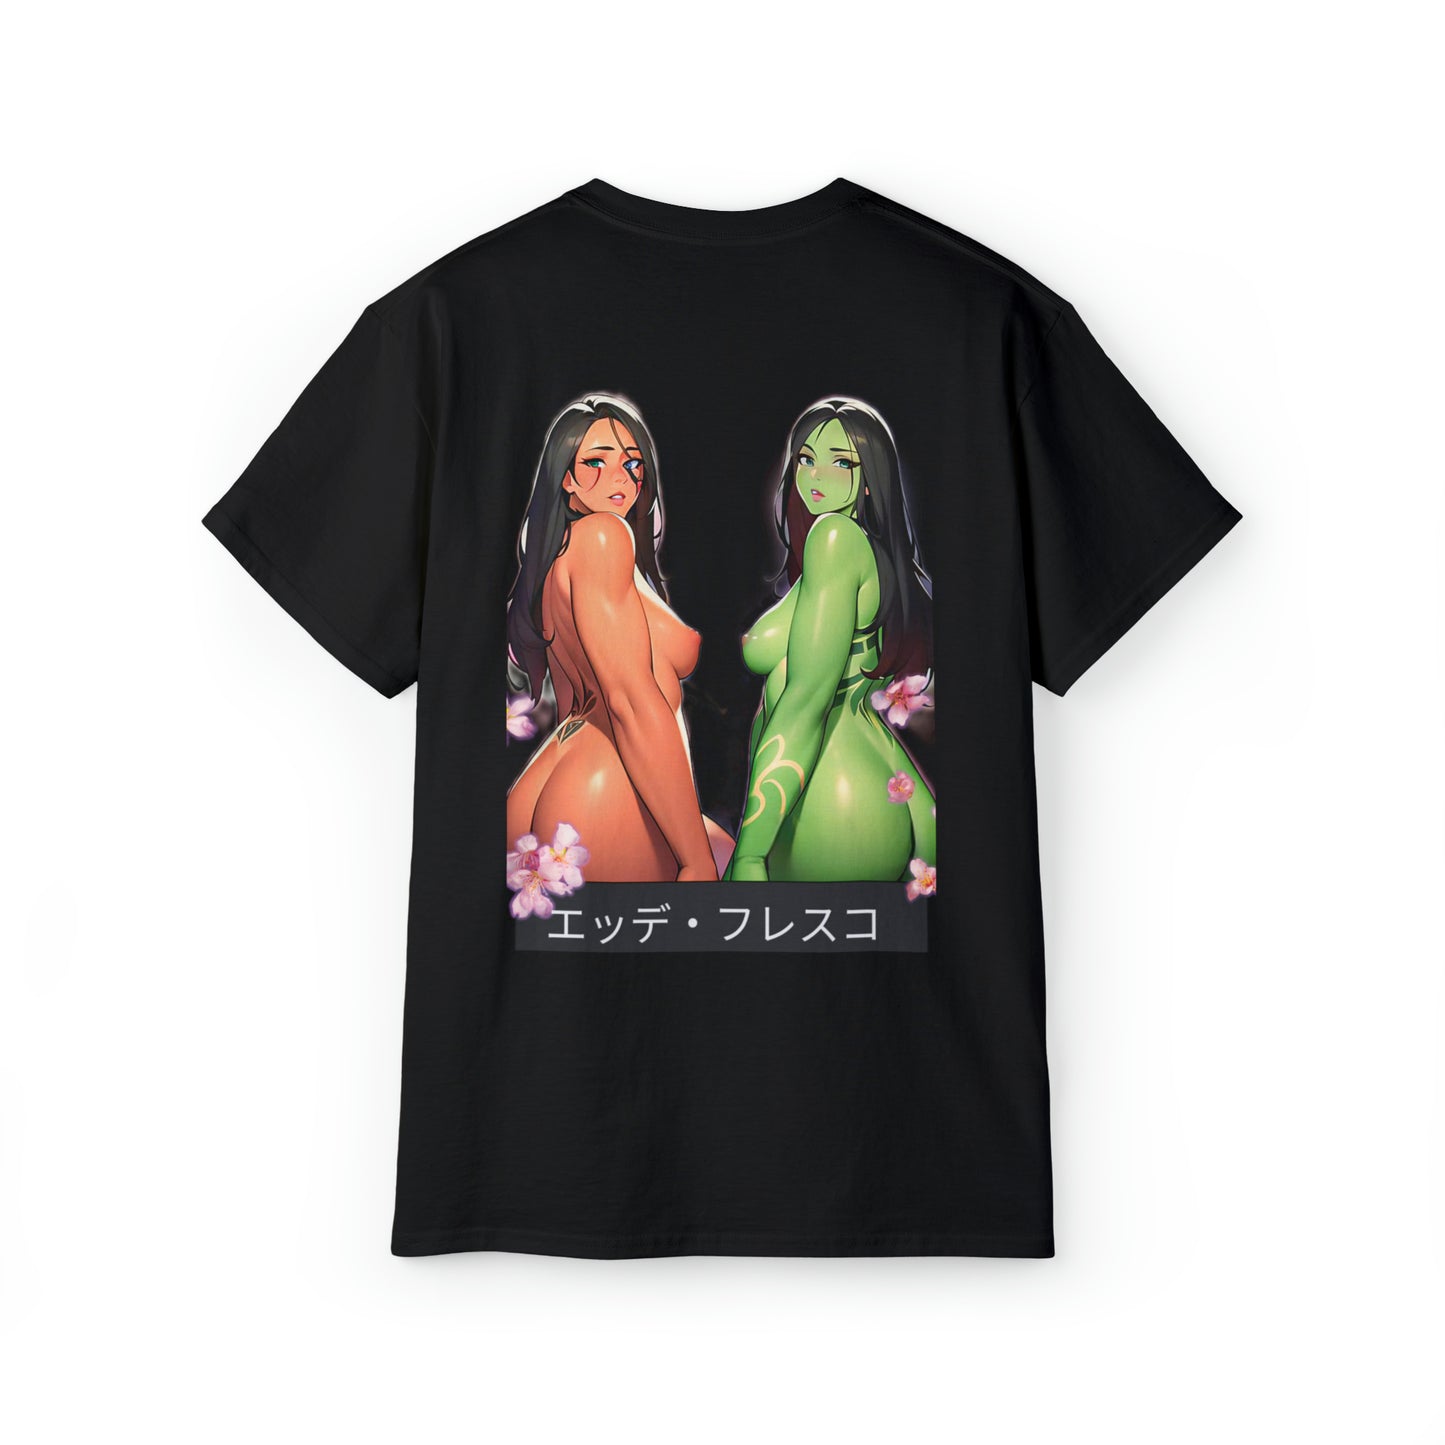 Together- Anime Style Art Unisex Ultra Cotton Tee